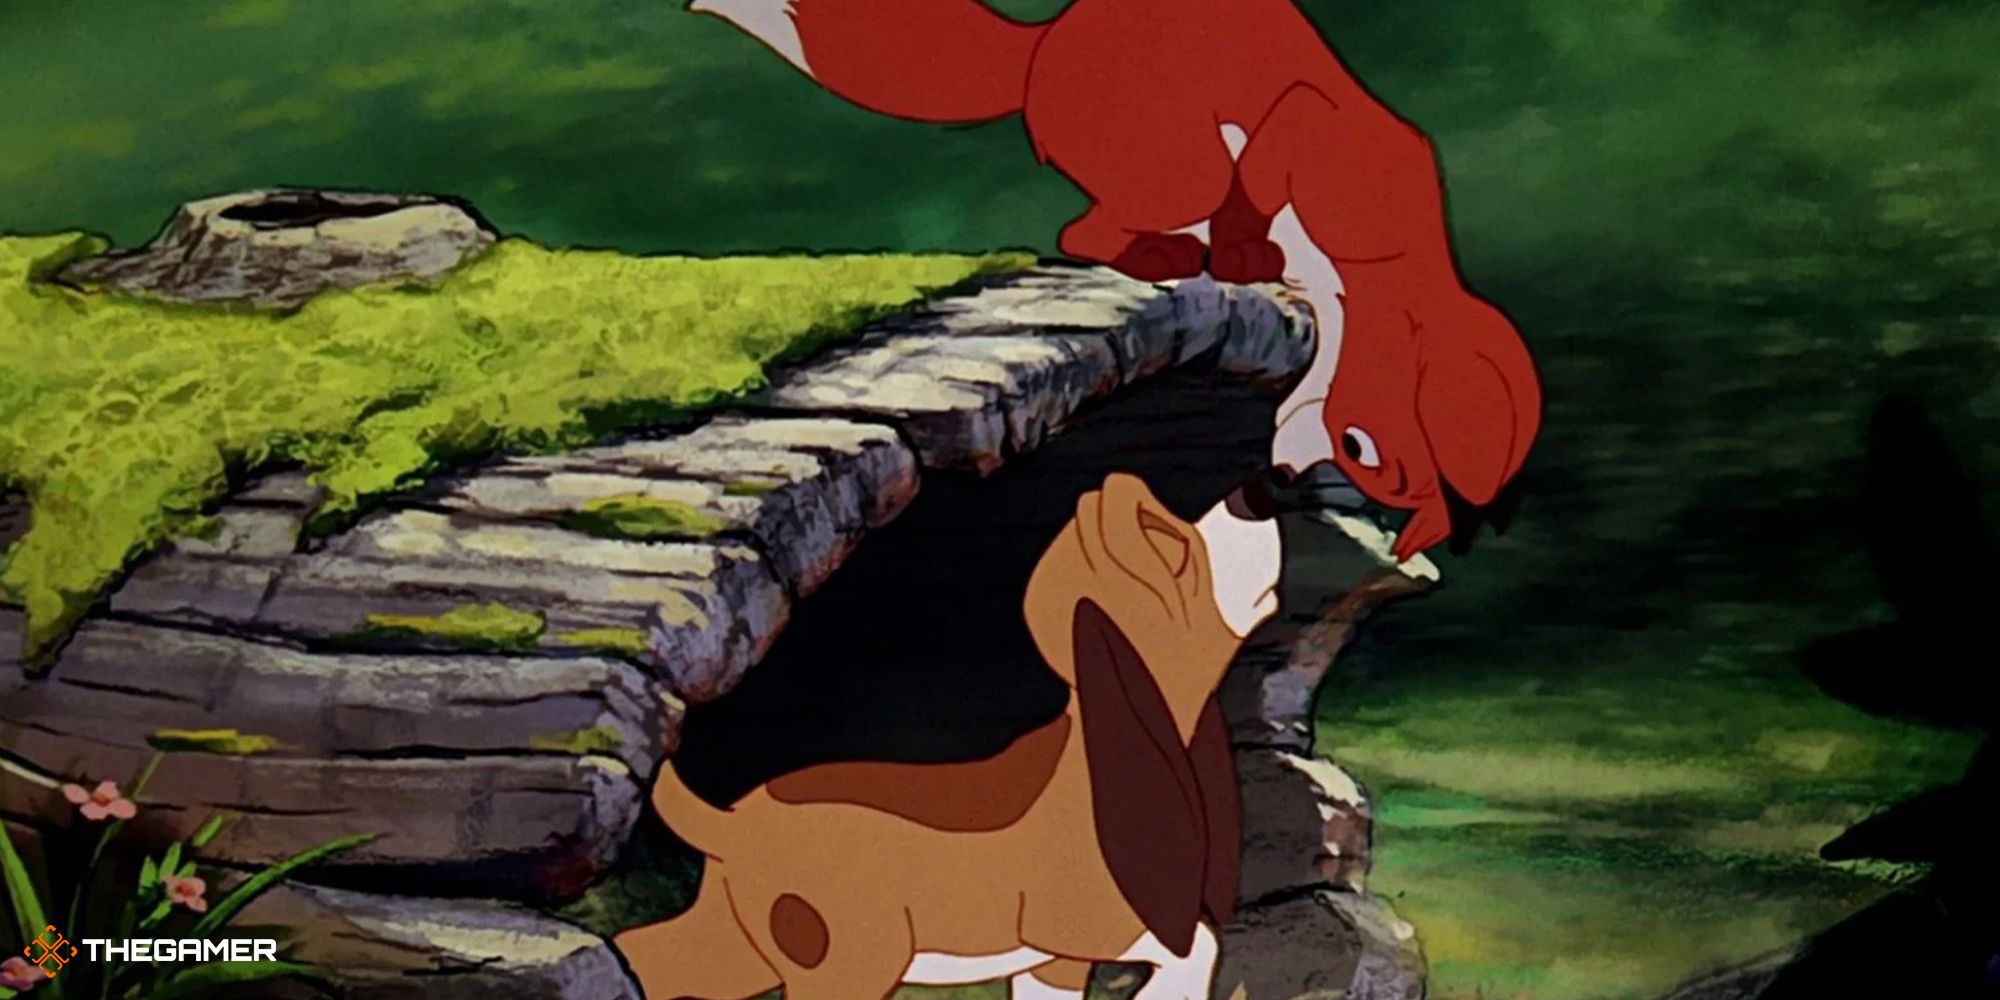 Todd and Copper meeting in The Fox and the Hound